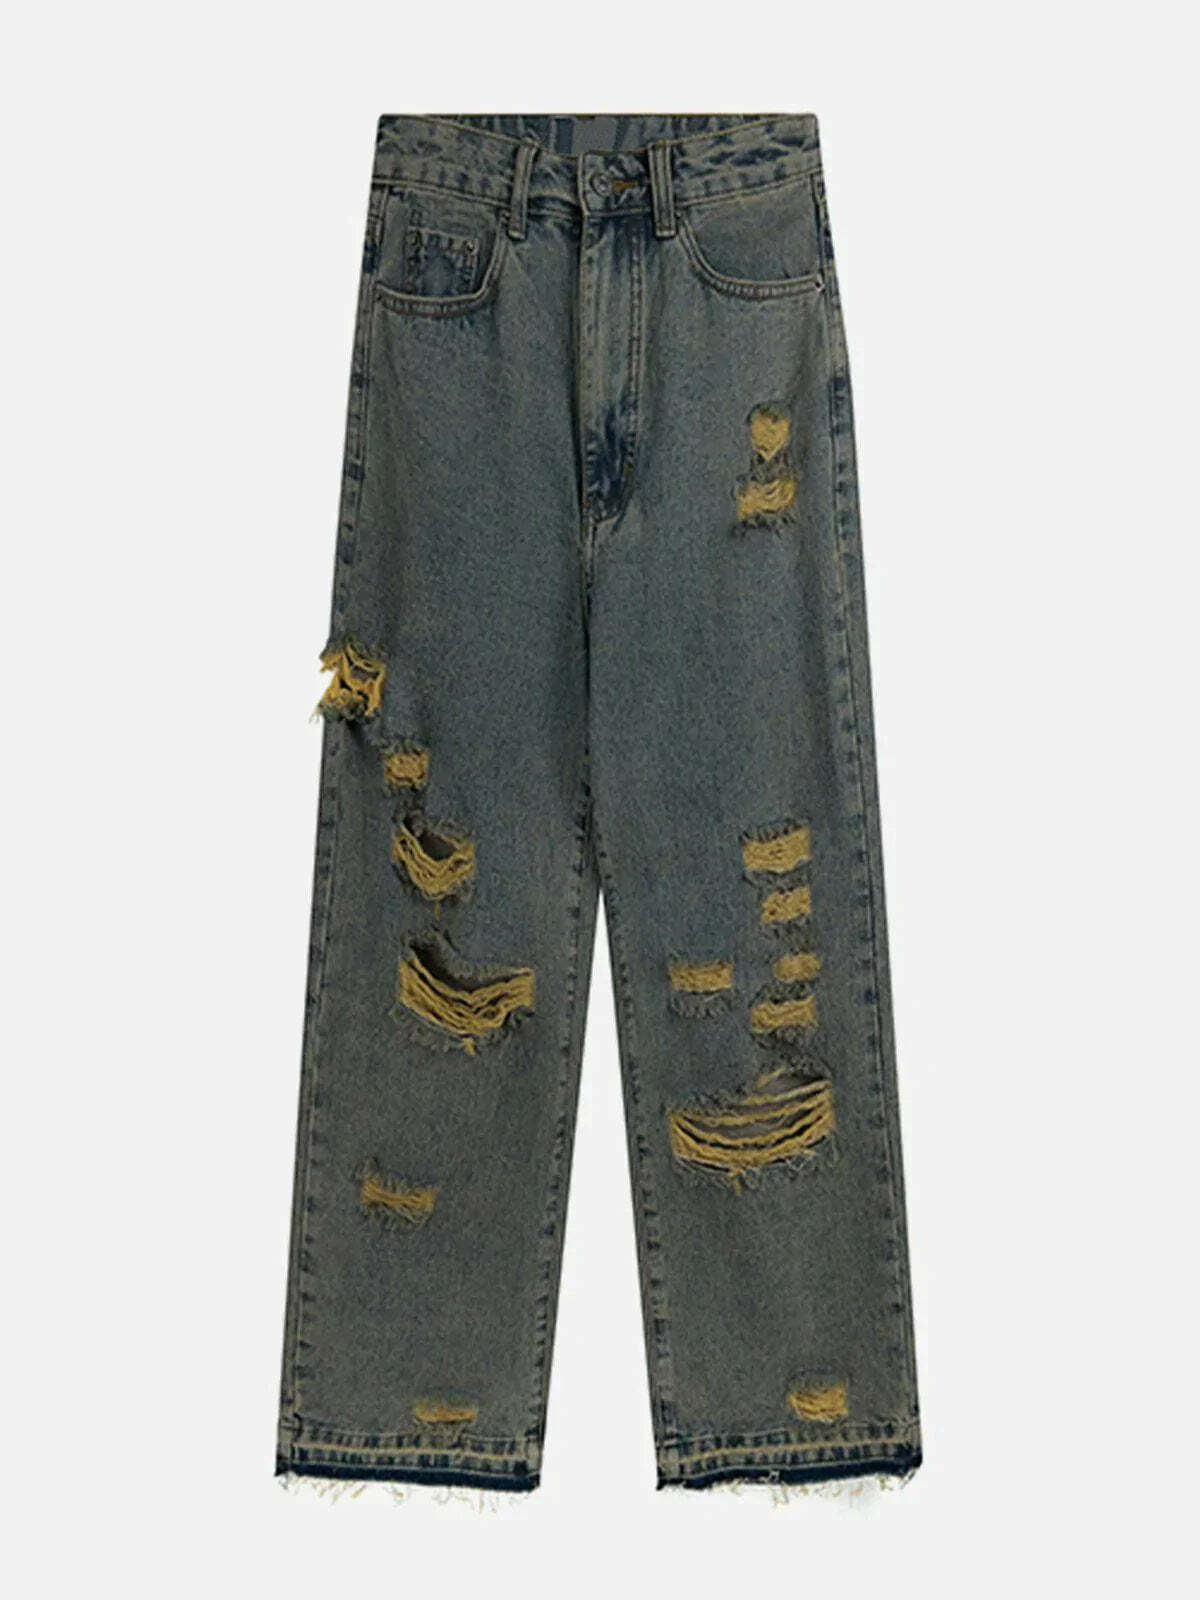 retro distressed jeans edgy & timeless 2060